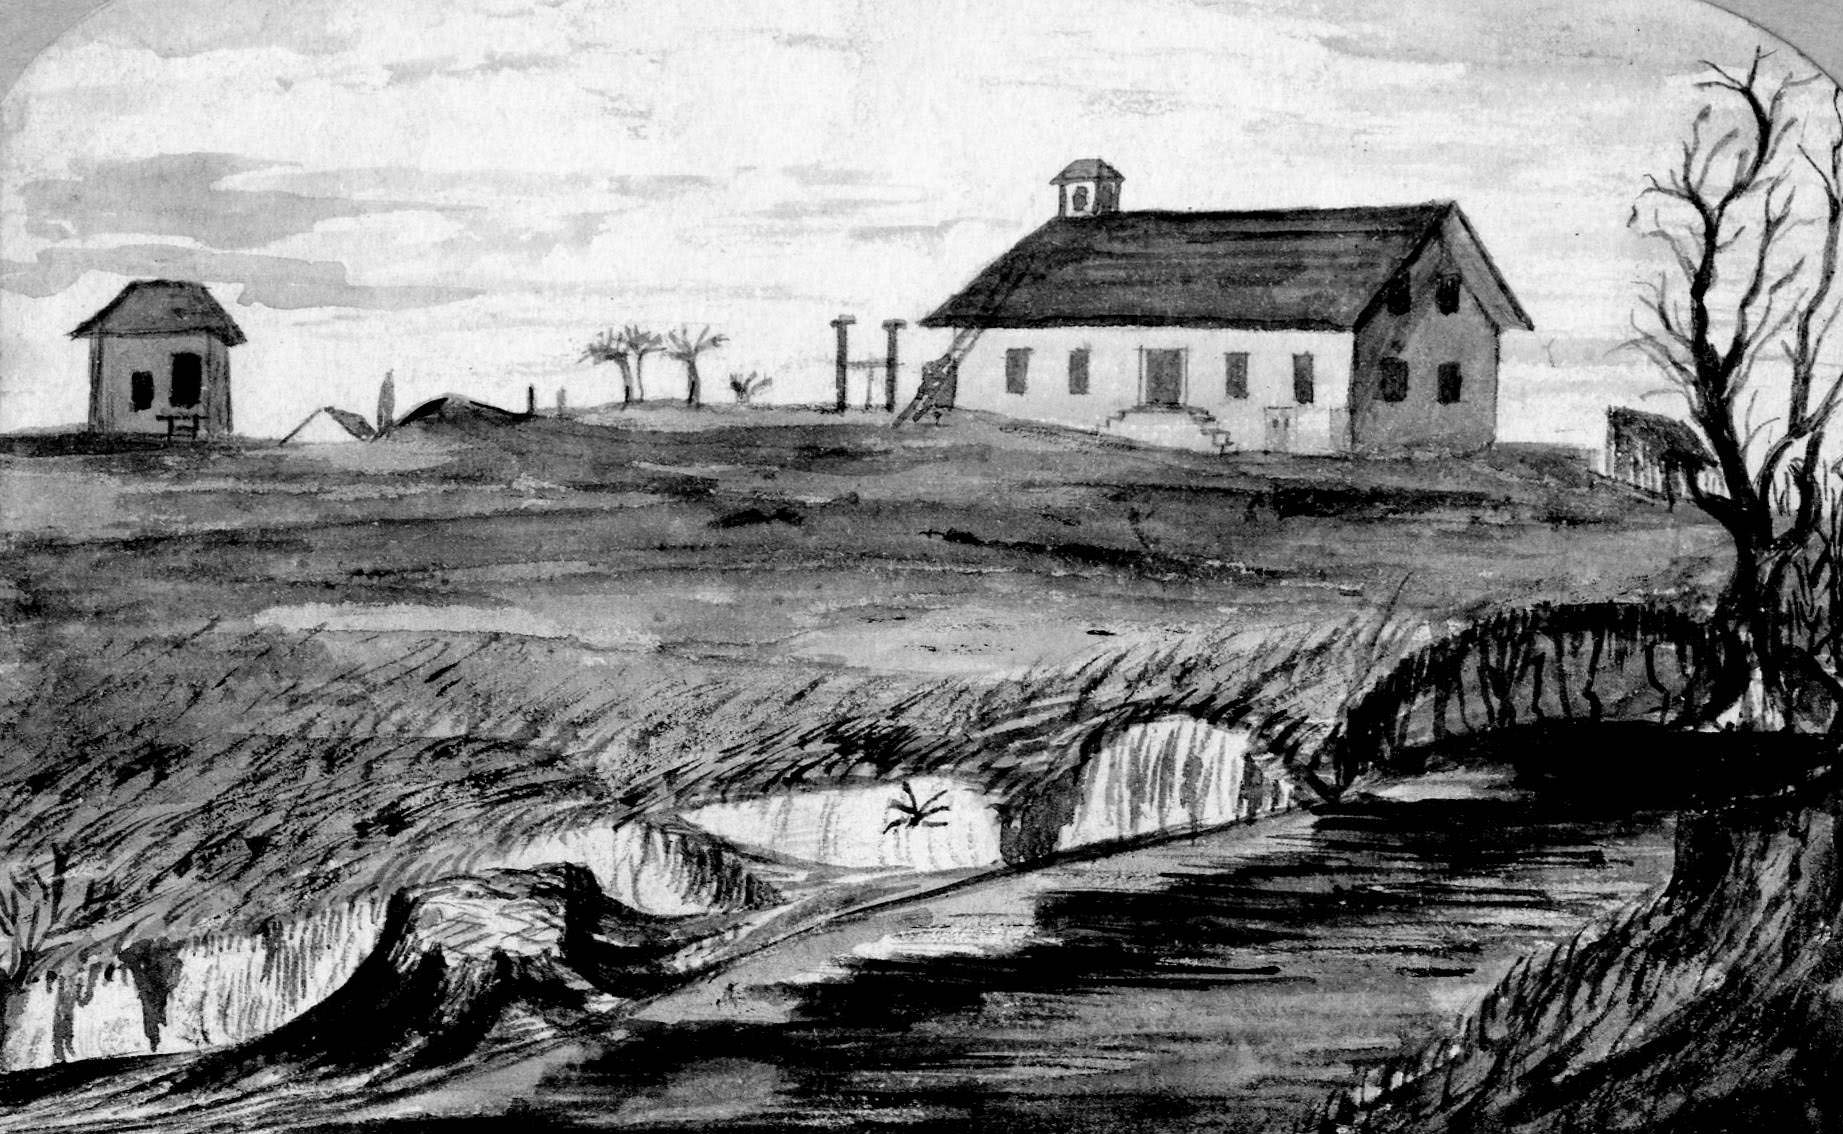 A View of Sutter's Fort, 1862